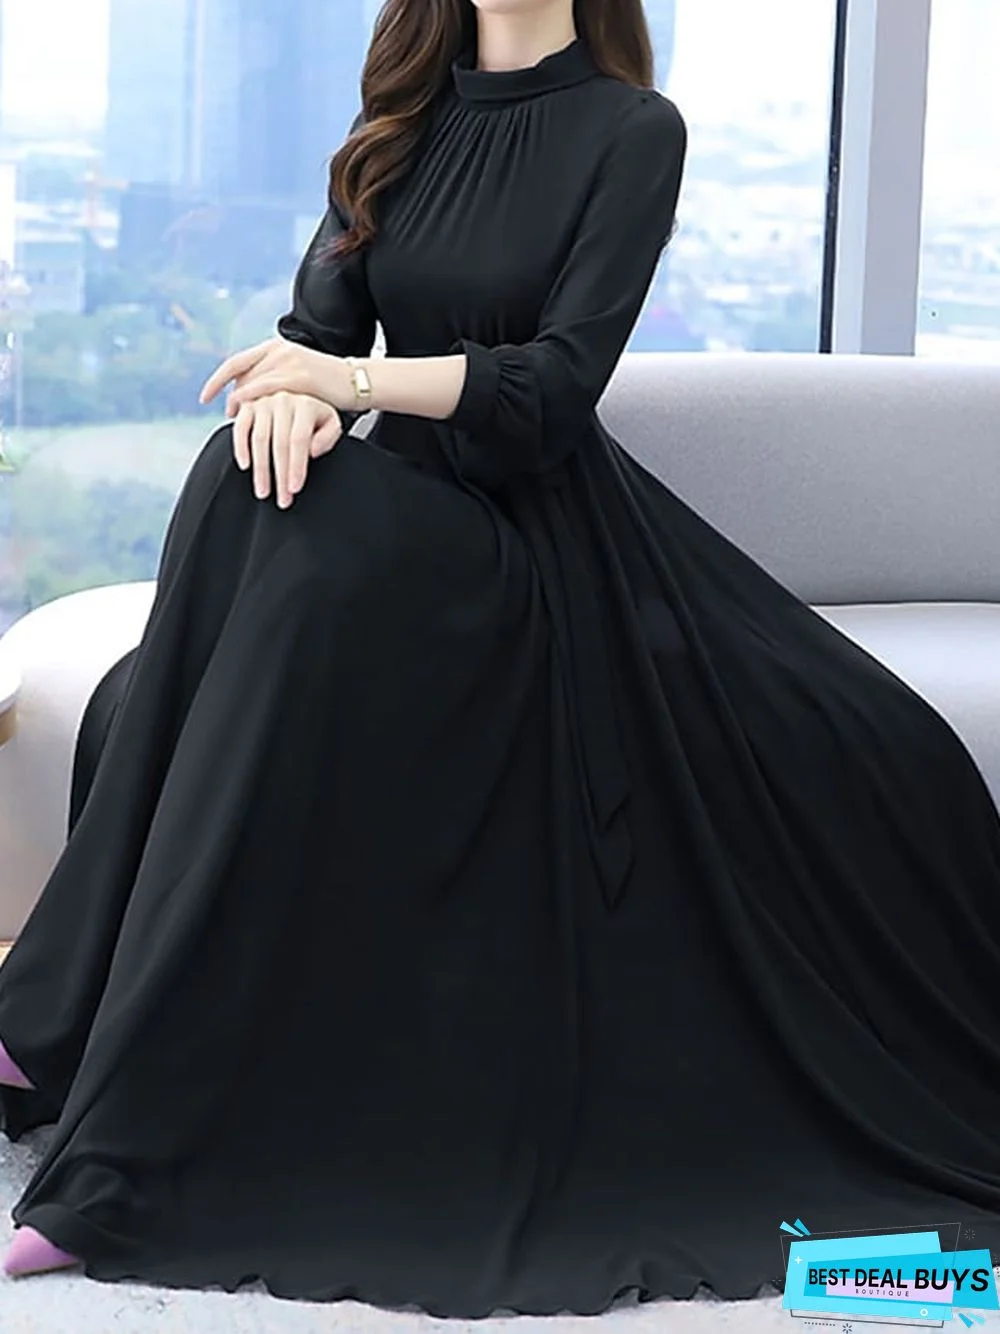 Women‘s Formal Party Dress Swing Dress Long Dress Maxi Dress Green Black Purple Long Sleeve Pure Color Lace up Winter Fall Autumn Stand Collar Winter Dress Fall Dress S M L XL XXL 3XL 4XL